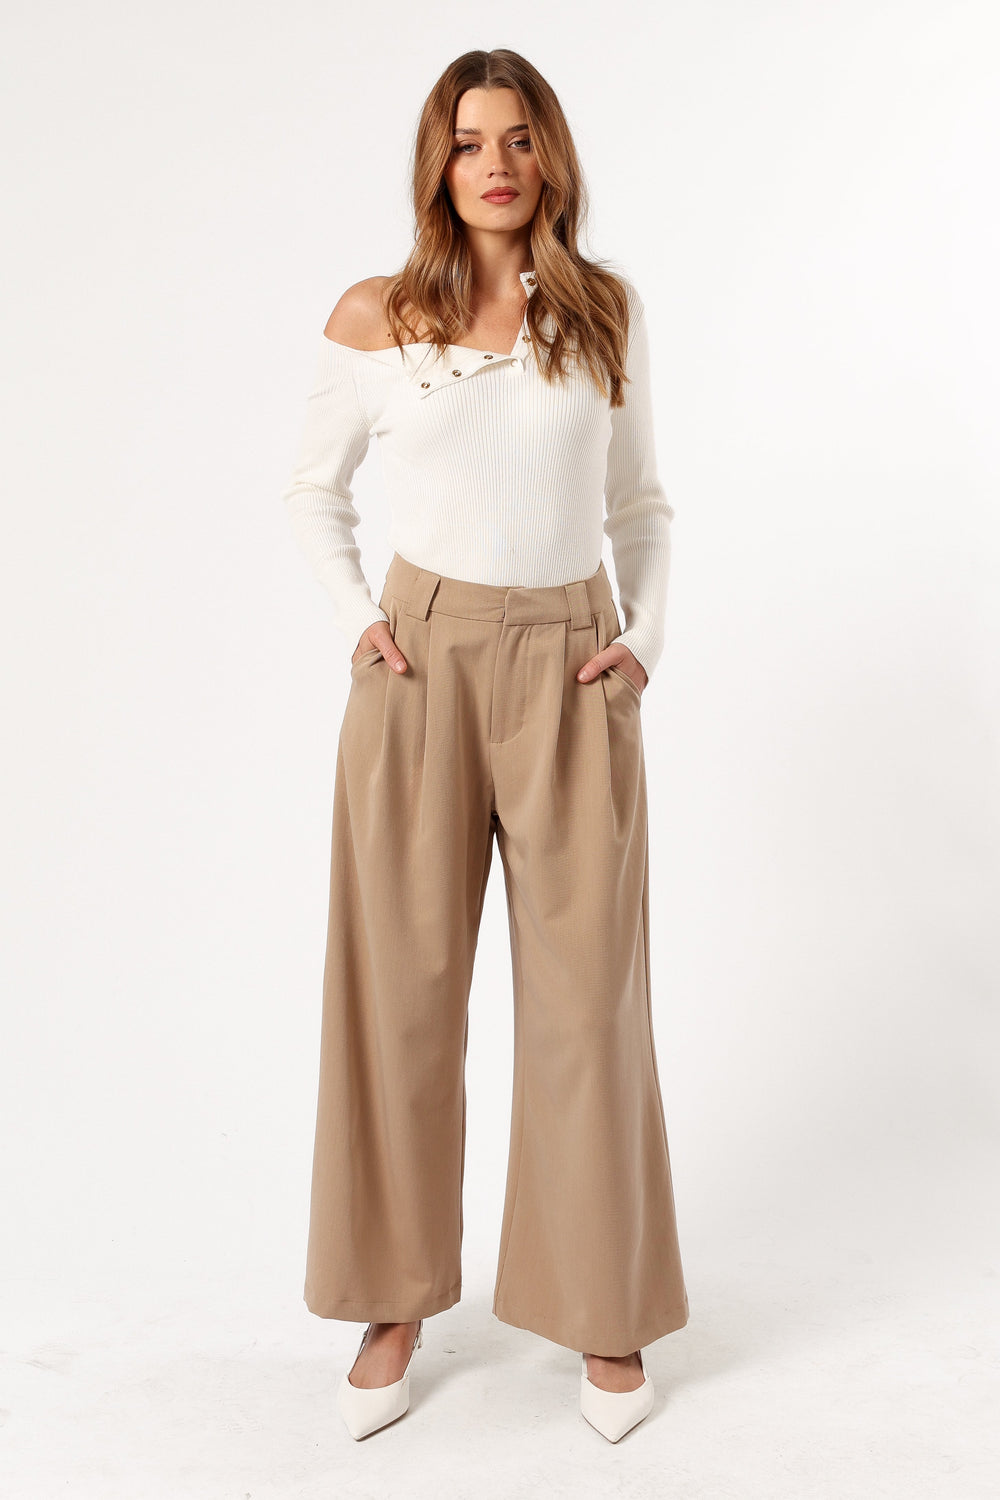 BOTTOMS @Sadella Pant - Sand (Hold for Winter Essentials)